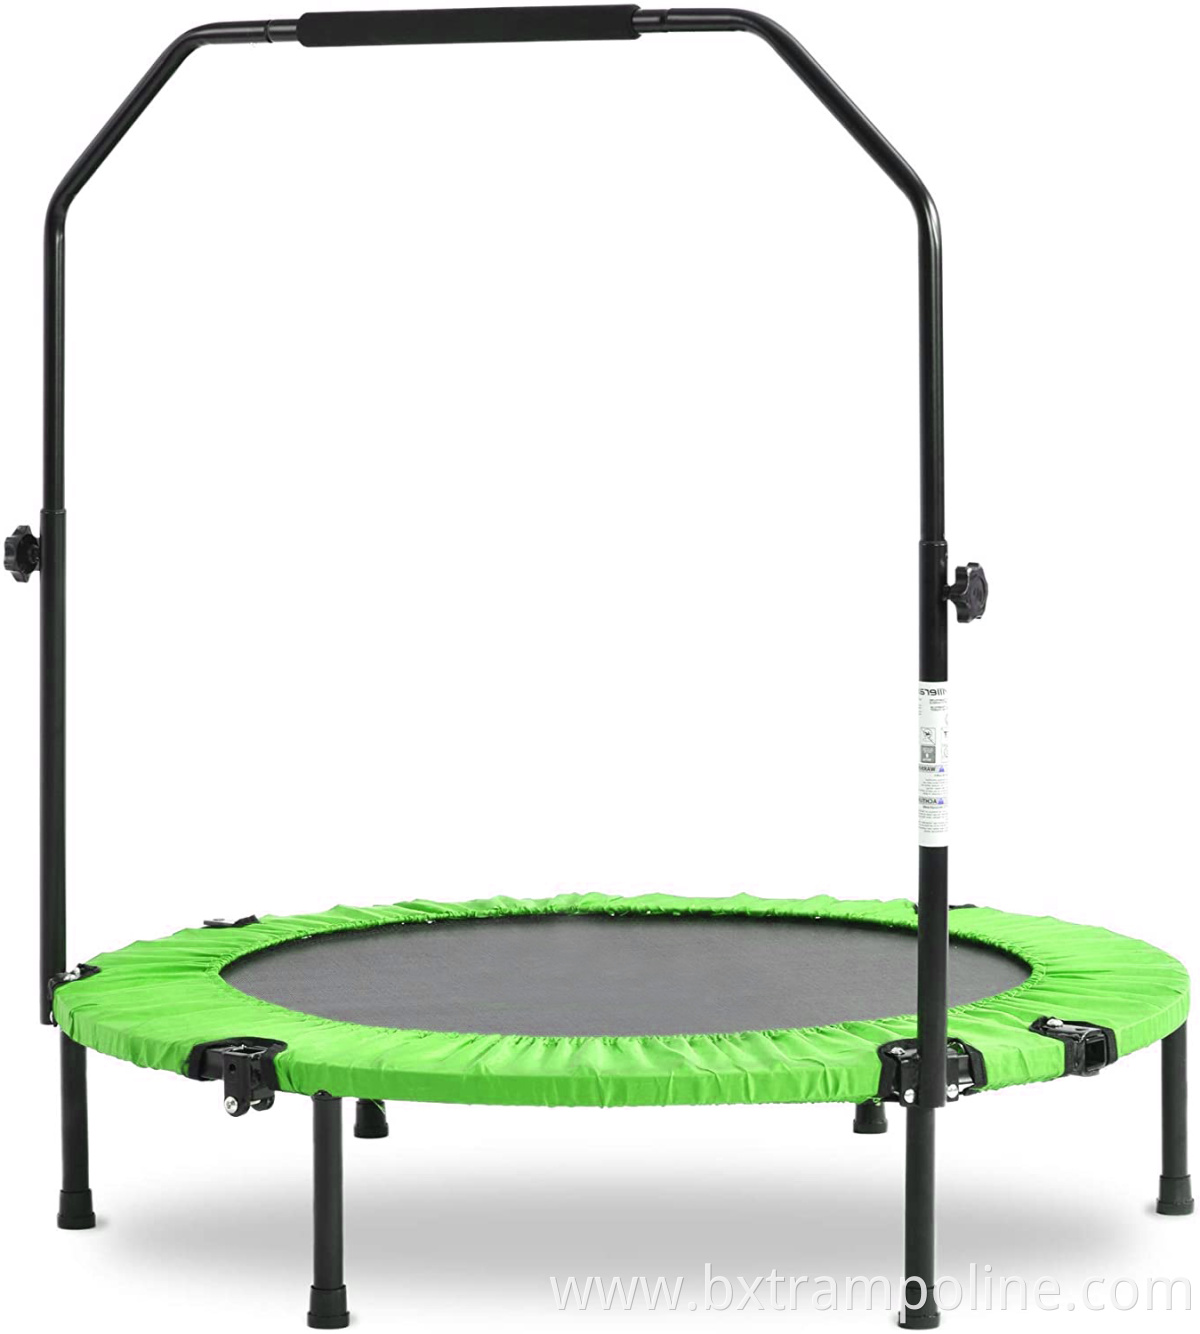 Trampoline with handrail 40" Daily Fitness Trampoline 330 lb Load for Kids/Adults